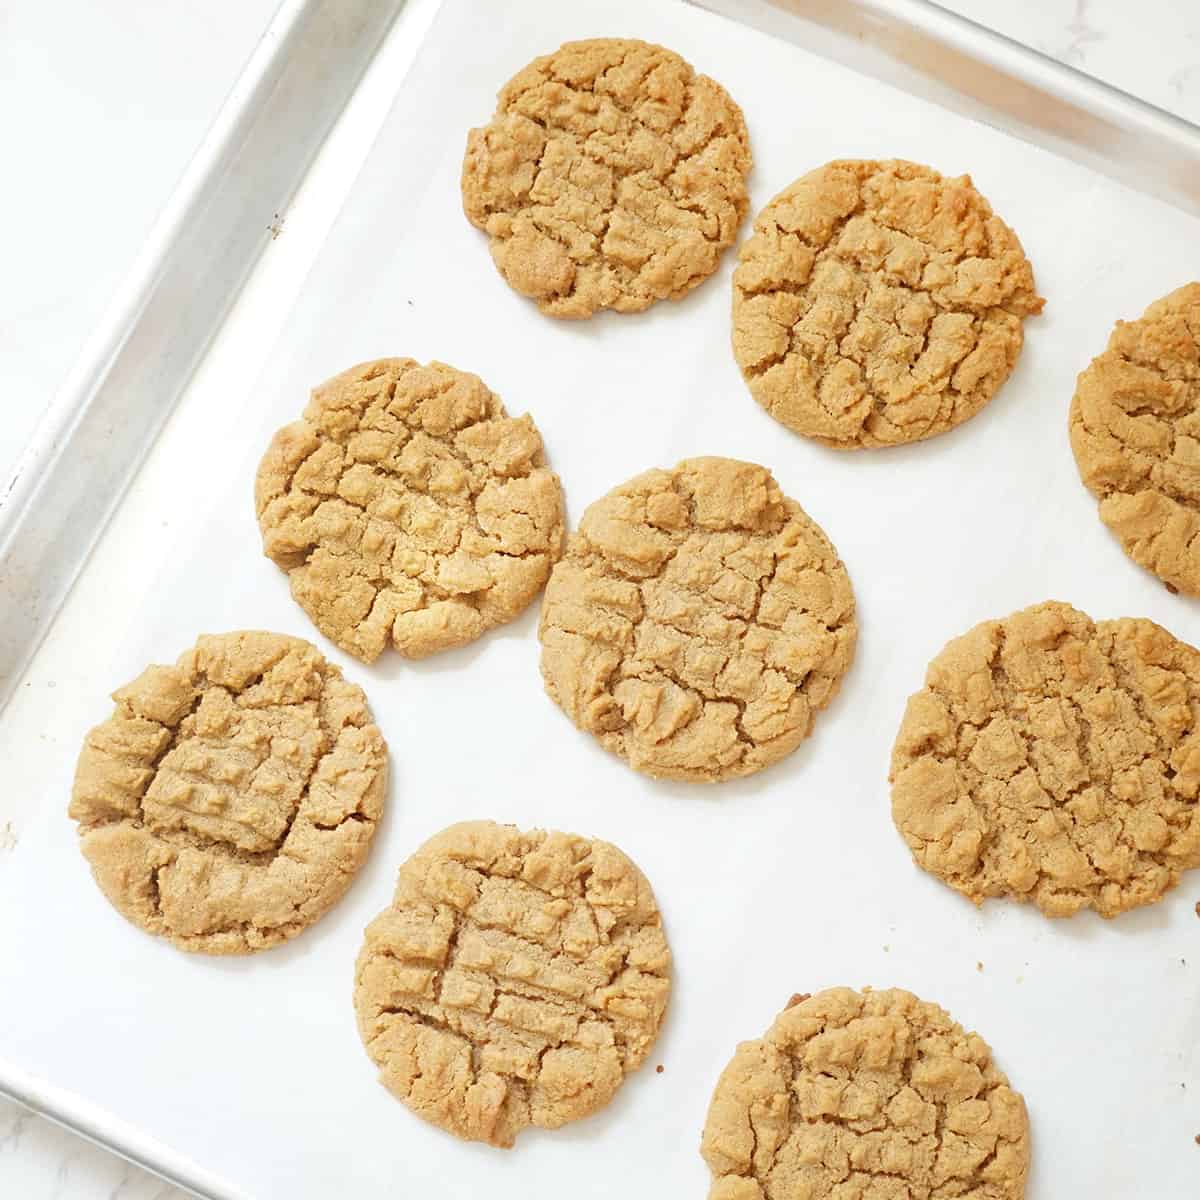 peanut butter cookies with no flour on baking tray